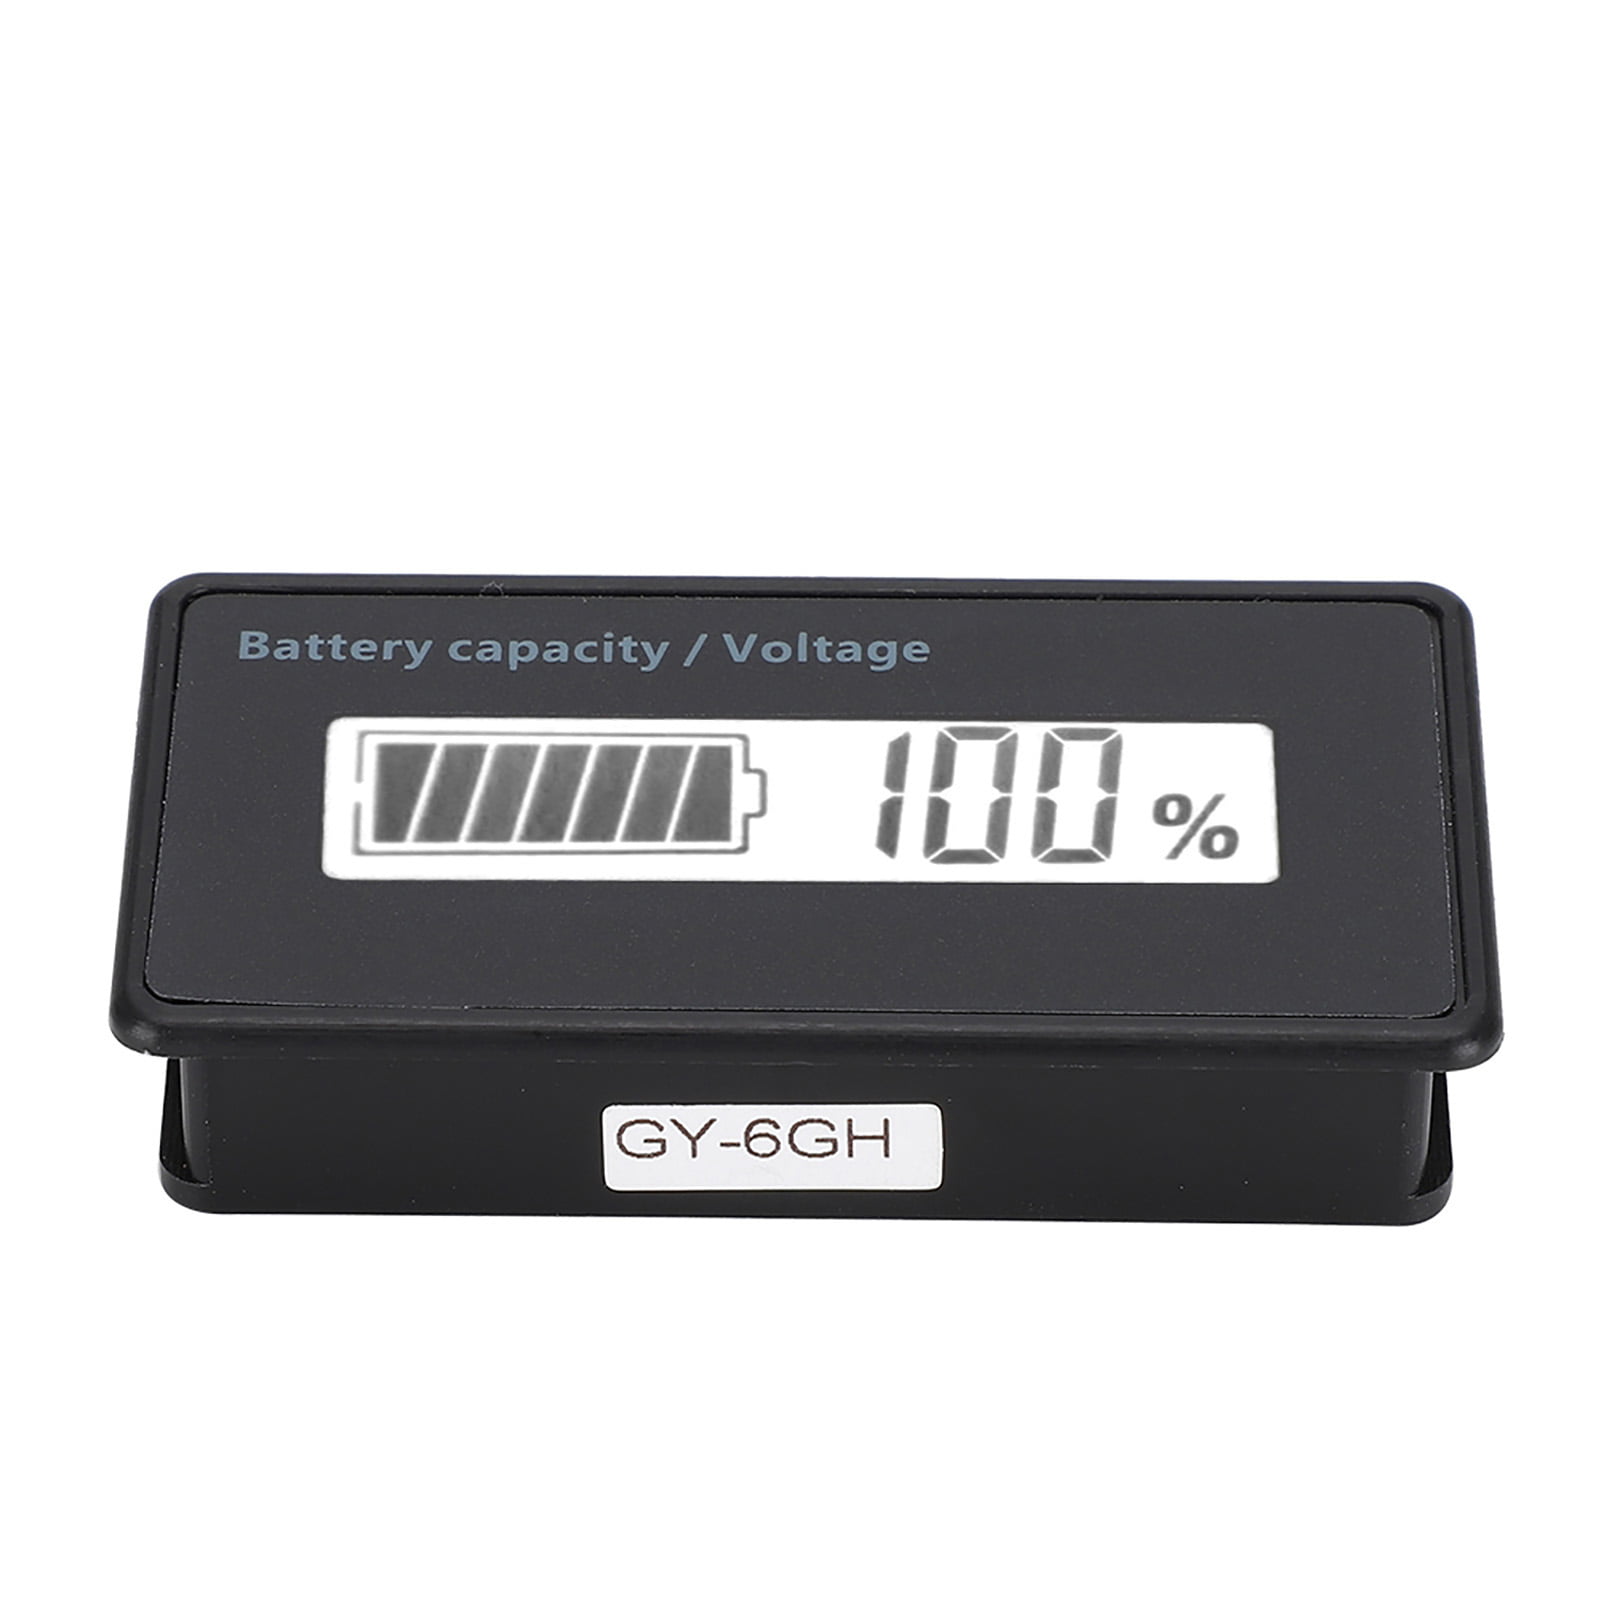 Blue LCD Digital Battery Capacity Monitor Compatible with Lead Acid Battery/Lithium Battery/Iron Lithium Battery Waterproof 12-84V Voltage Meter Monitor/Battery Capacity Tester 